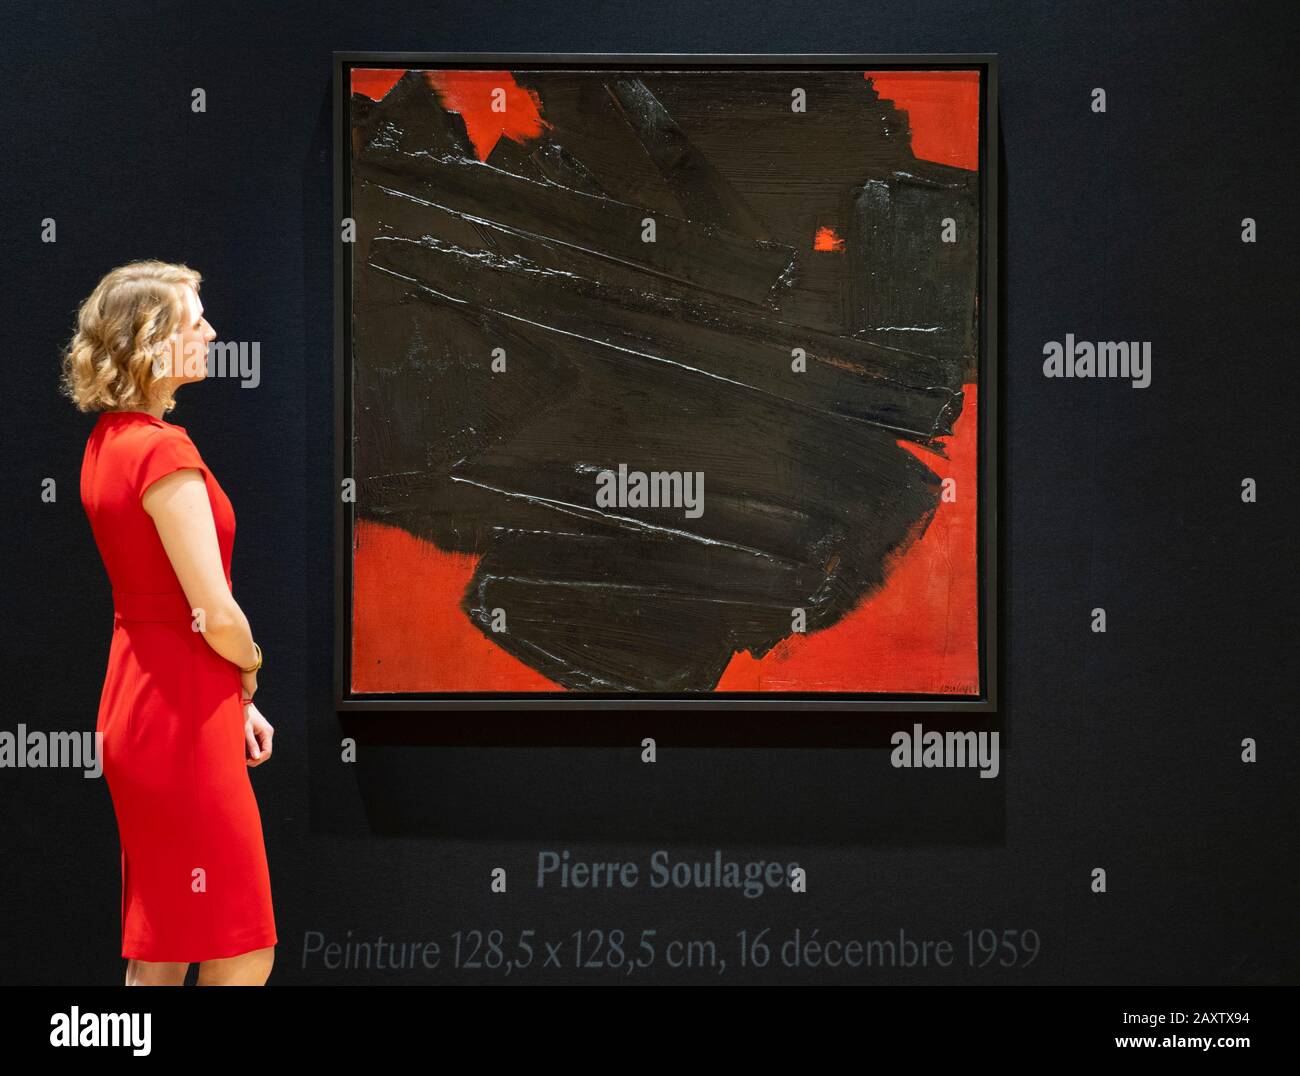 Bonhams, New Bond Street, London, UK. 13th February 2020. Peinture, 1959, French artist Pierre Soulages masterpiece will lead Bonhams Post-War & Contemporary Art Sale in London on 12 March with an estimate of £5,500,000-7,500,000. Credit: Malcolm Park/Alamy Live News. Stock Photo